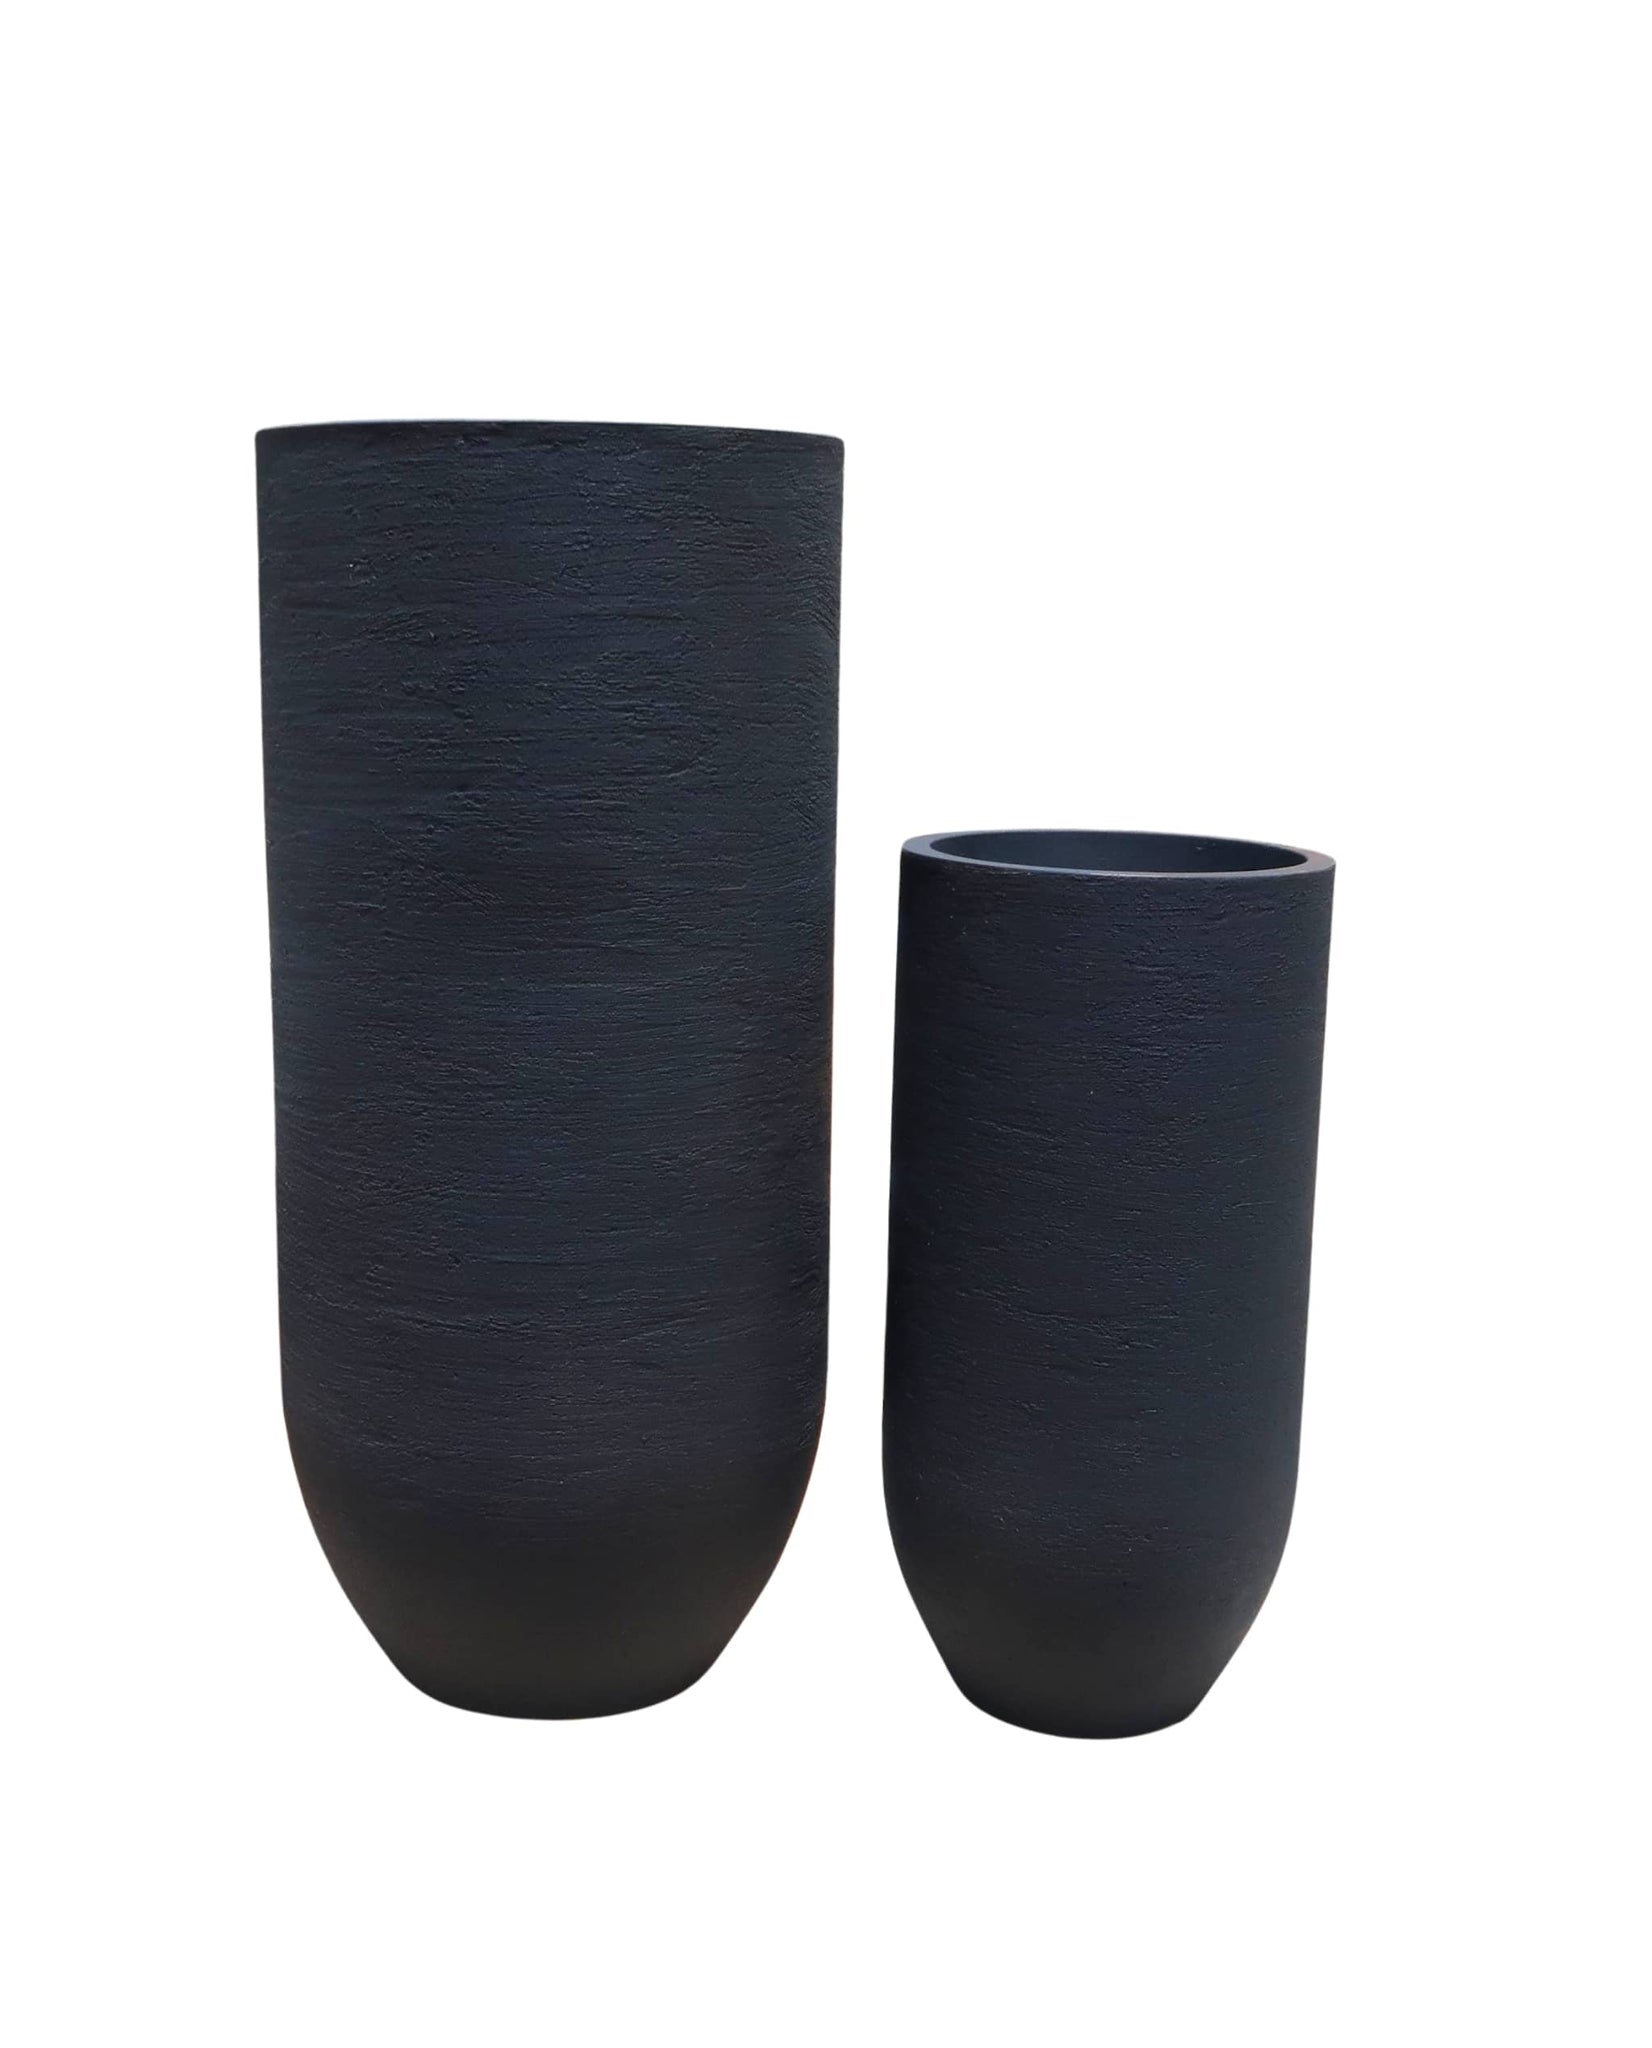 European Verticale Japi Planter, Tall and sleek textured finish. Beautiful complement to any decor. Adds height  and elegance. Florastyle by Hingham.